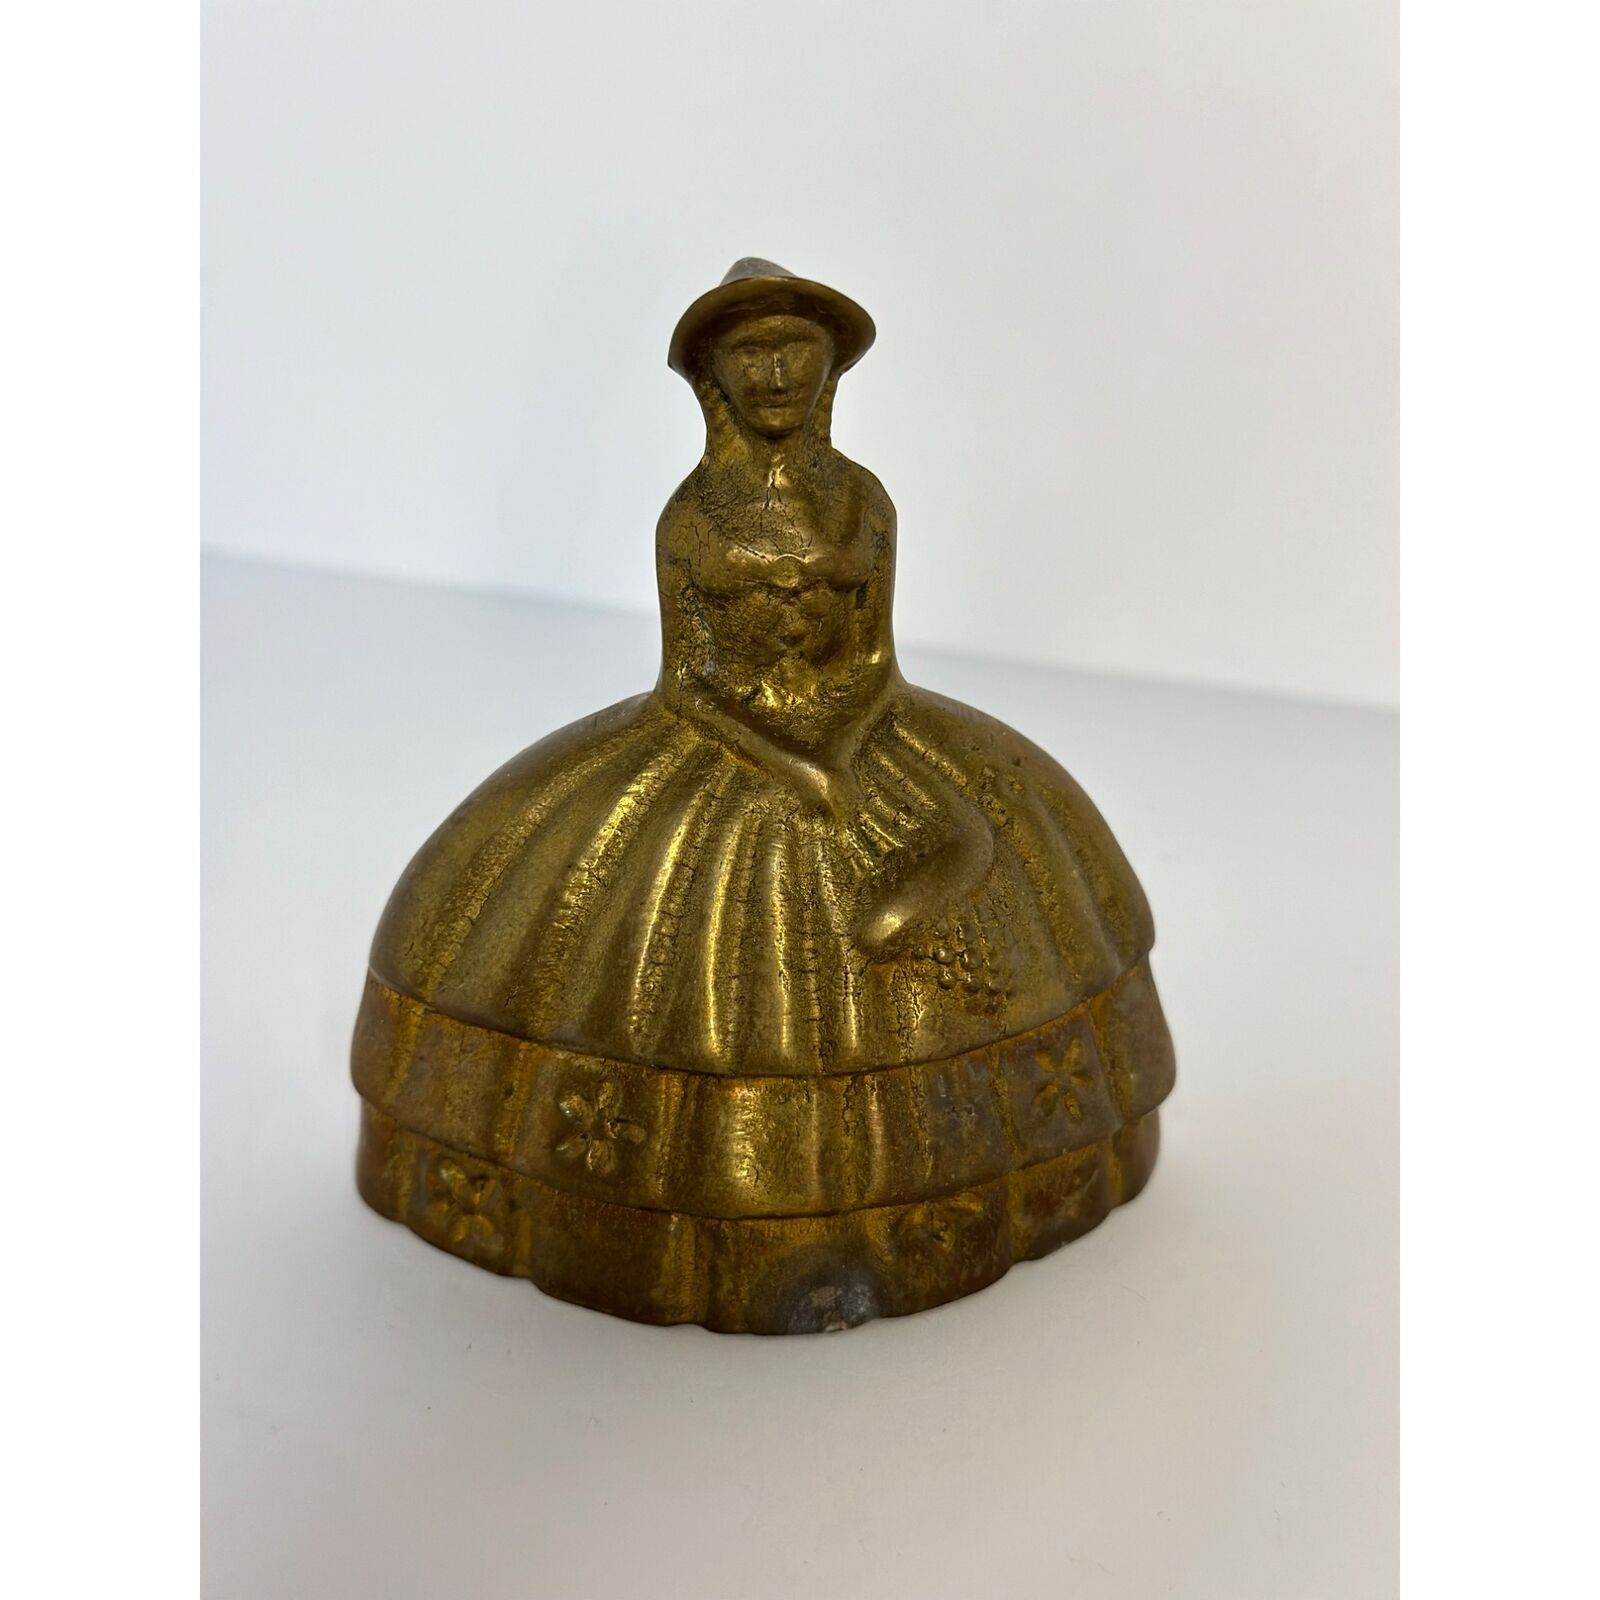 VTG Brass Southern Belle Crinoline Lady Figurine Paperweight Bell Home Decor